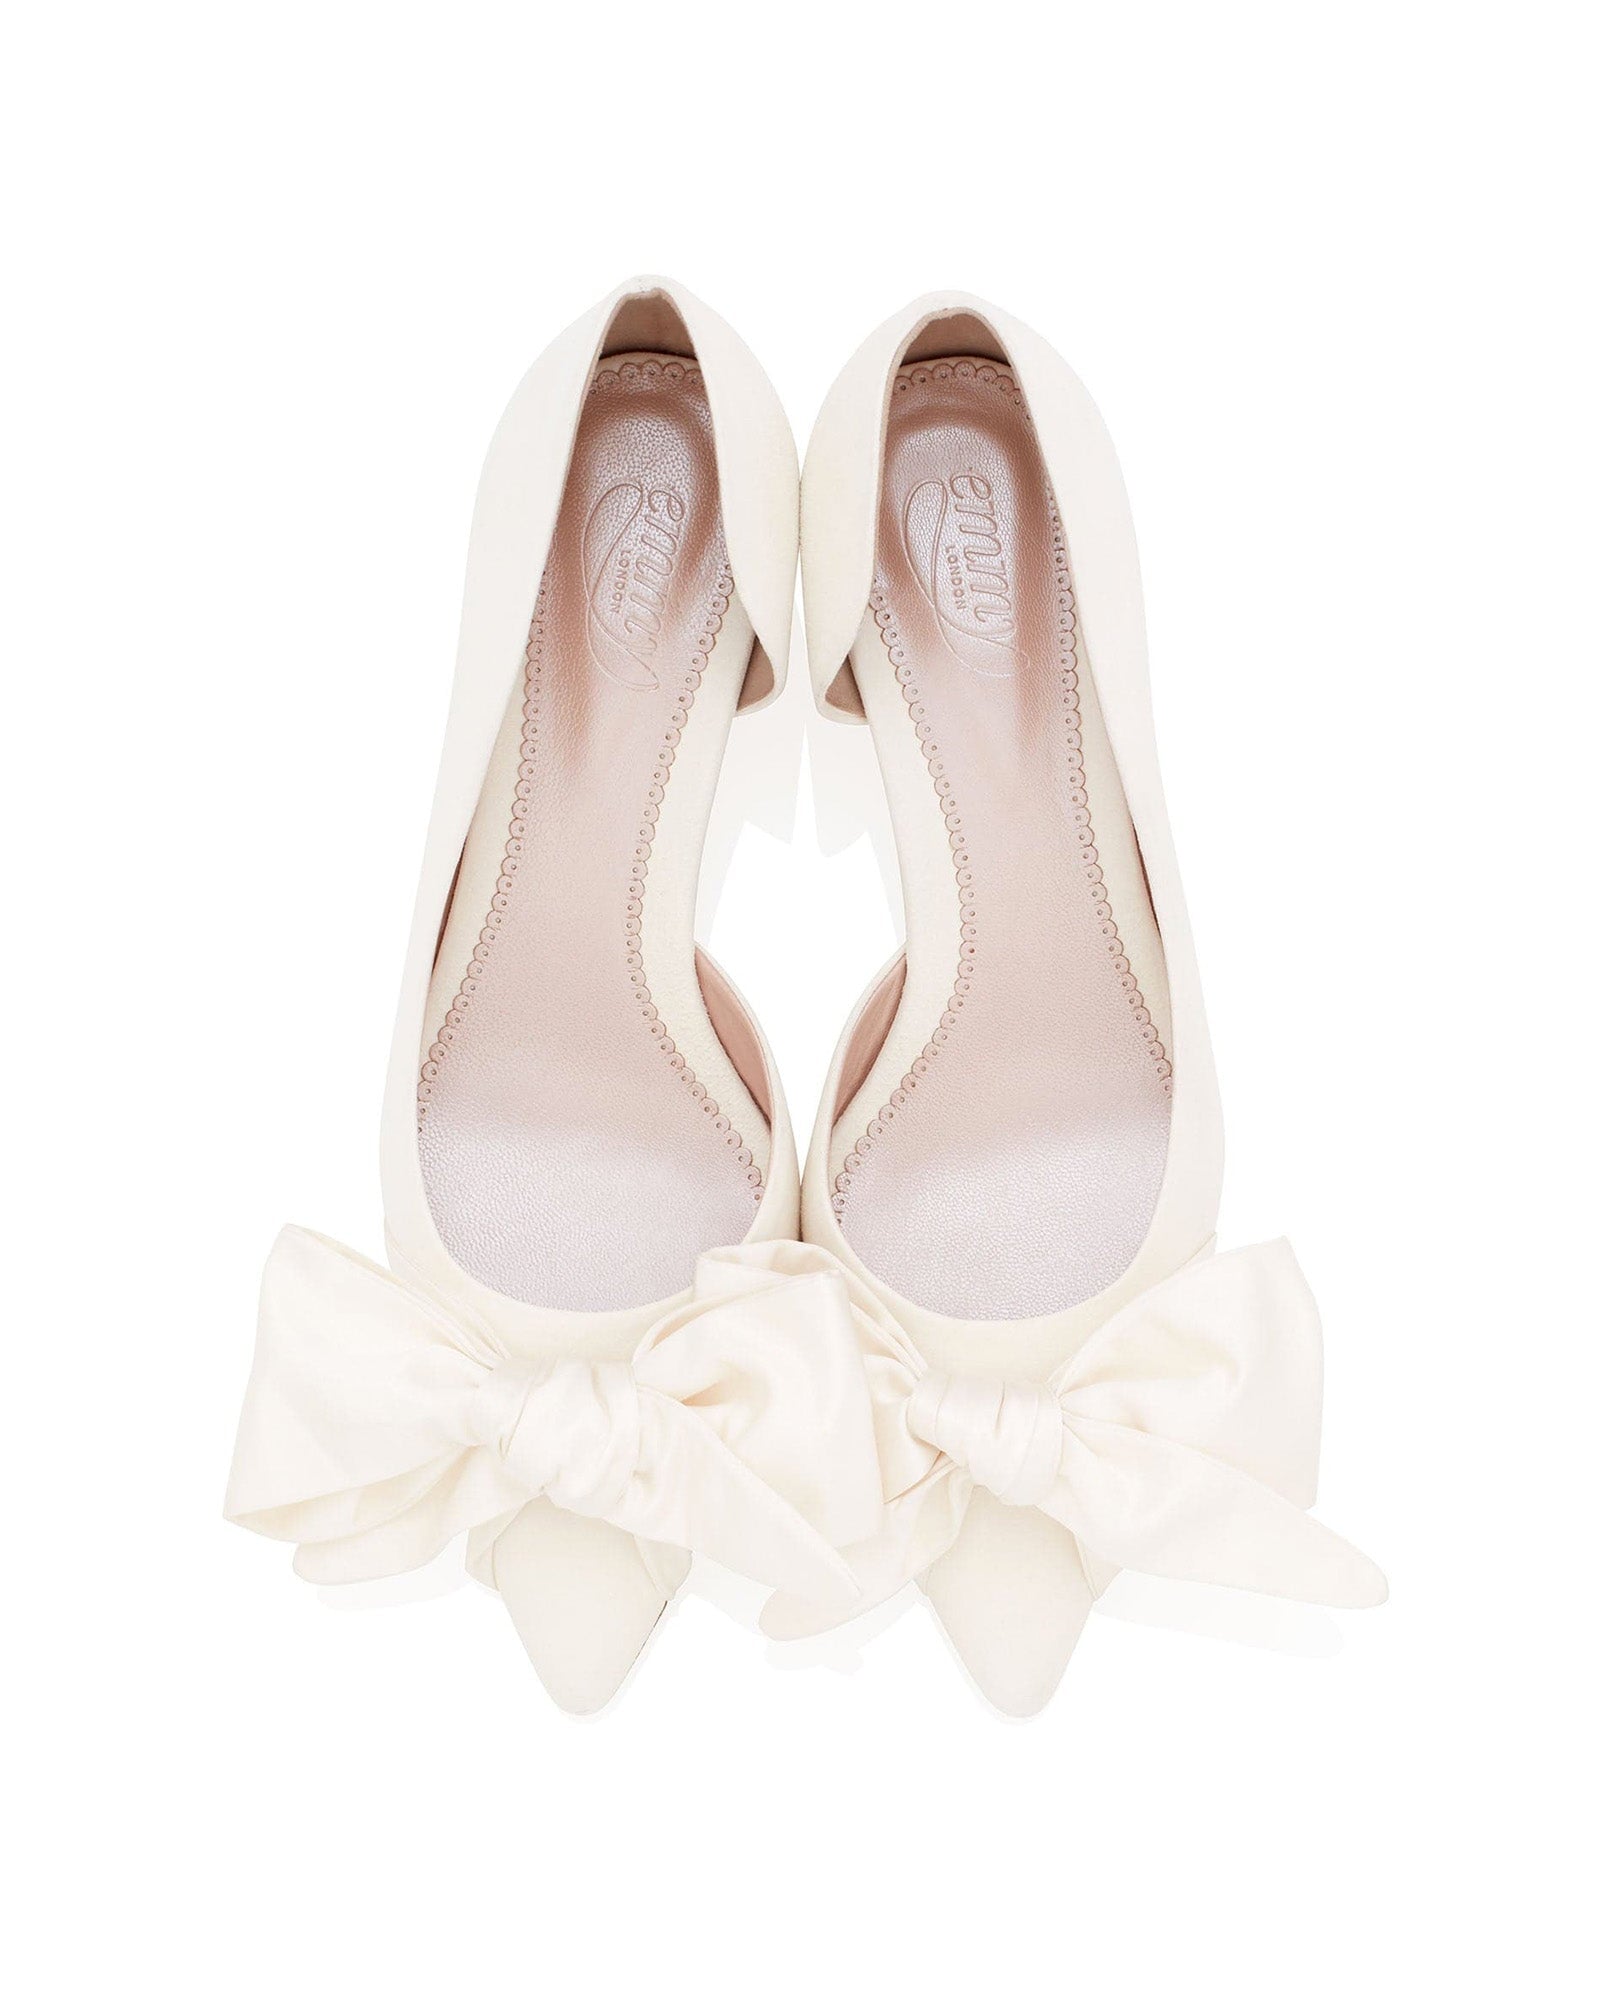 Florence Kitten Block Ivory Bridal Shoe Ivory Suede Shoes with Satin Bow  image